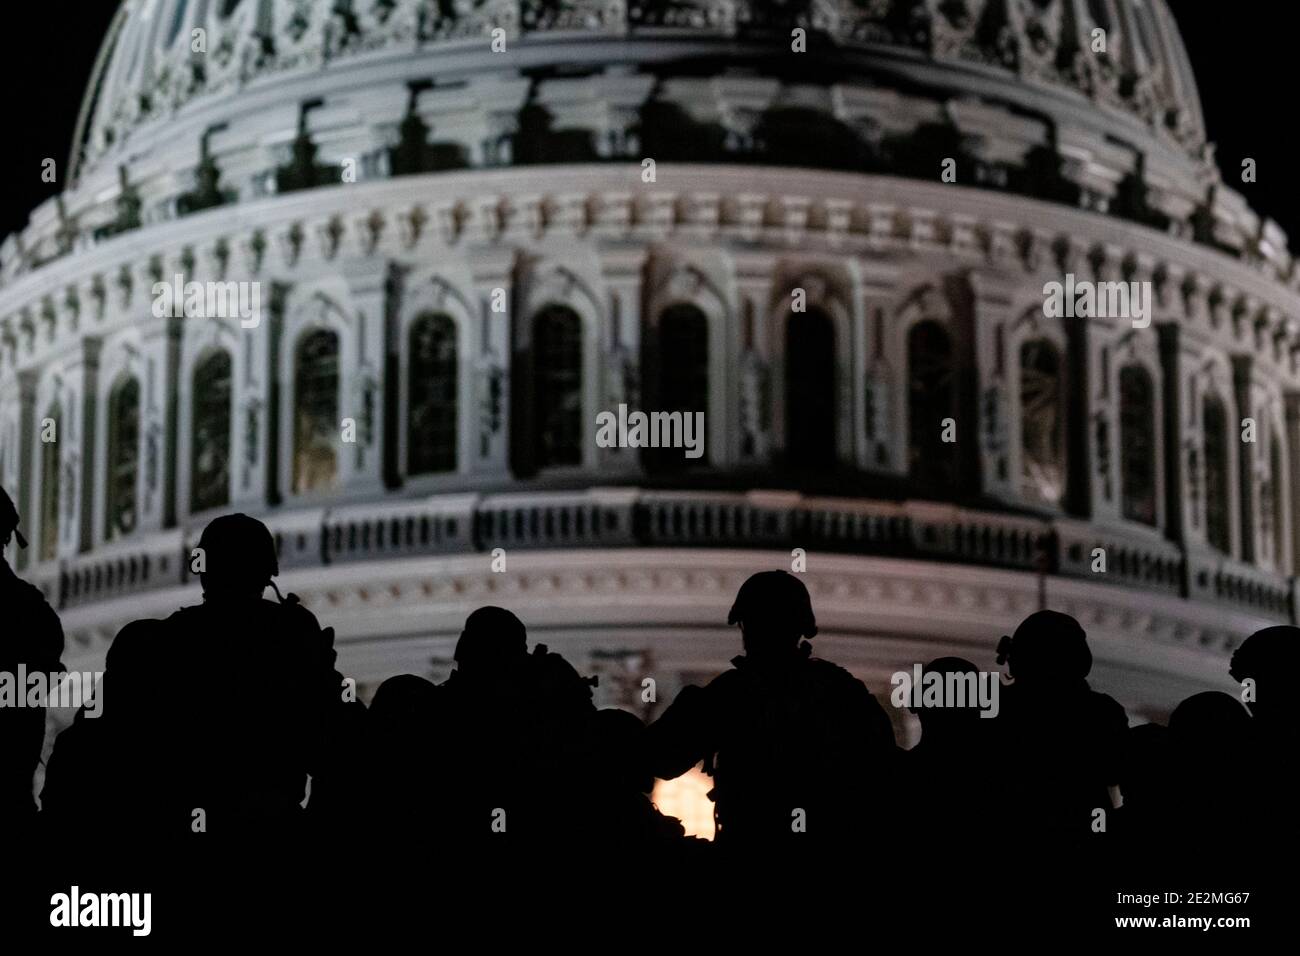 Washington, United States. 13th Jan, 2021. U.S. soldiers and airmen with the National Guard are silhouetted against the Capitol dome as they secure the area for the 59th Presidential Inauguration January 13, 2021 in Washington, DC More than 10,000 national guard troops have been deployed to provide security following the insurrection by Pro-Trump rioters. Credit: Planetpix/Alamy Live News Stock Photo